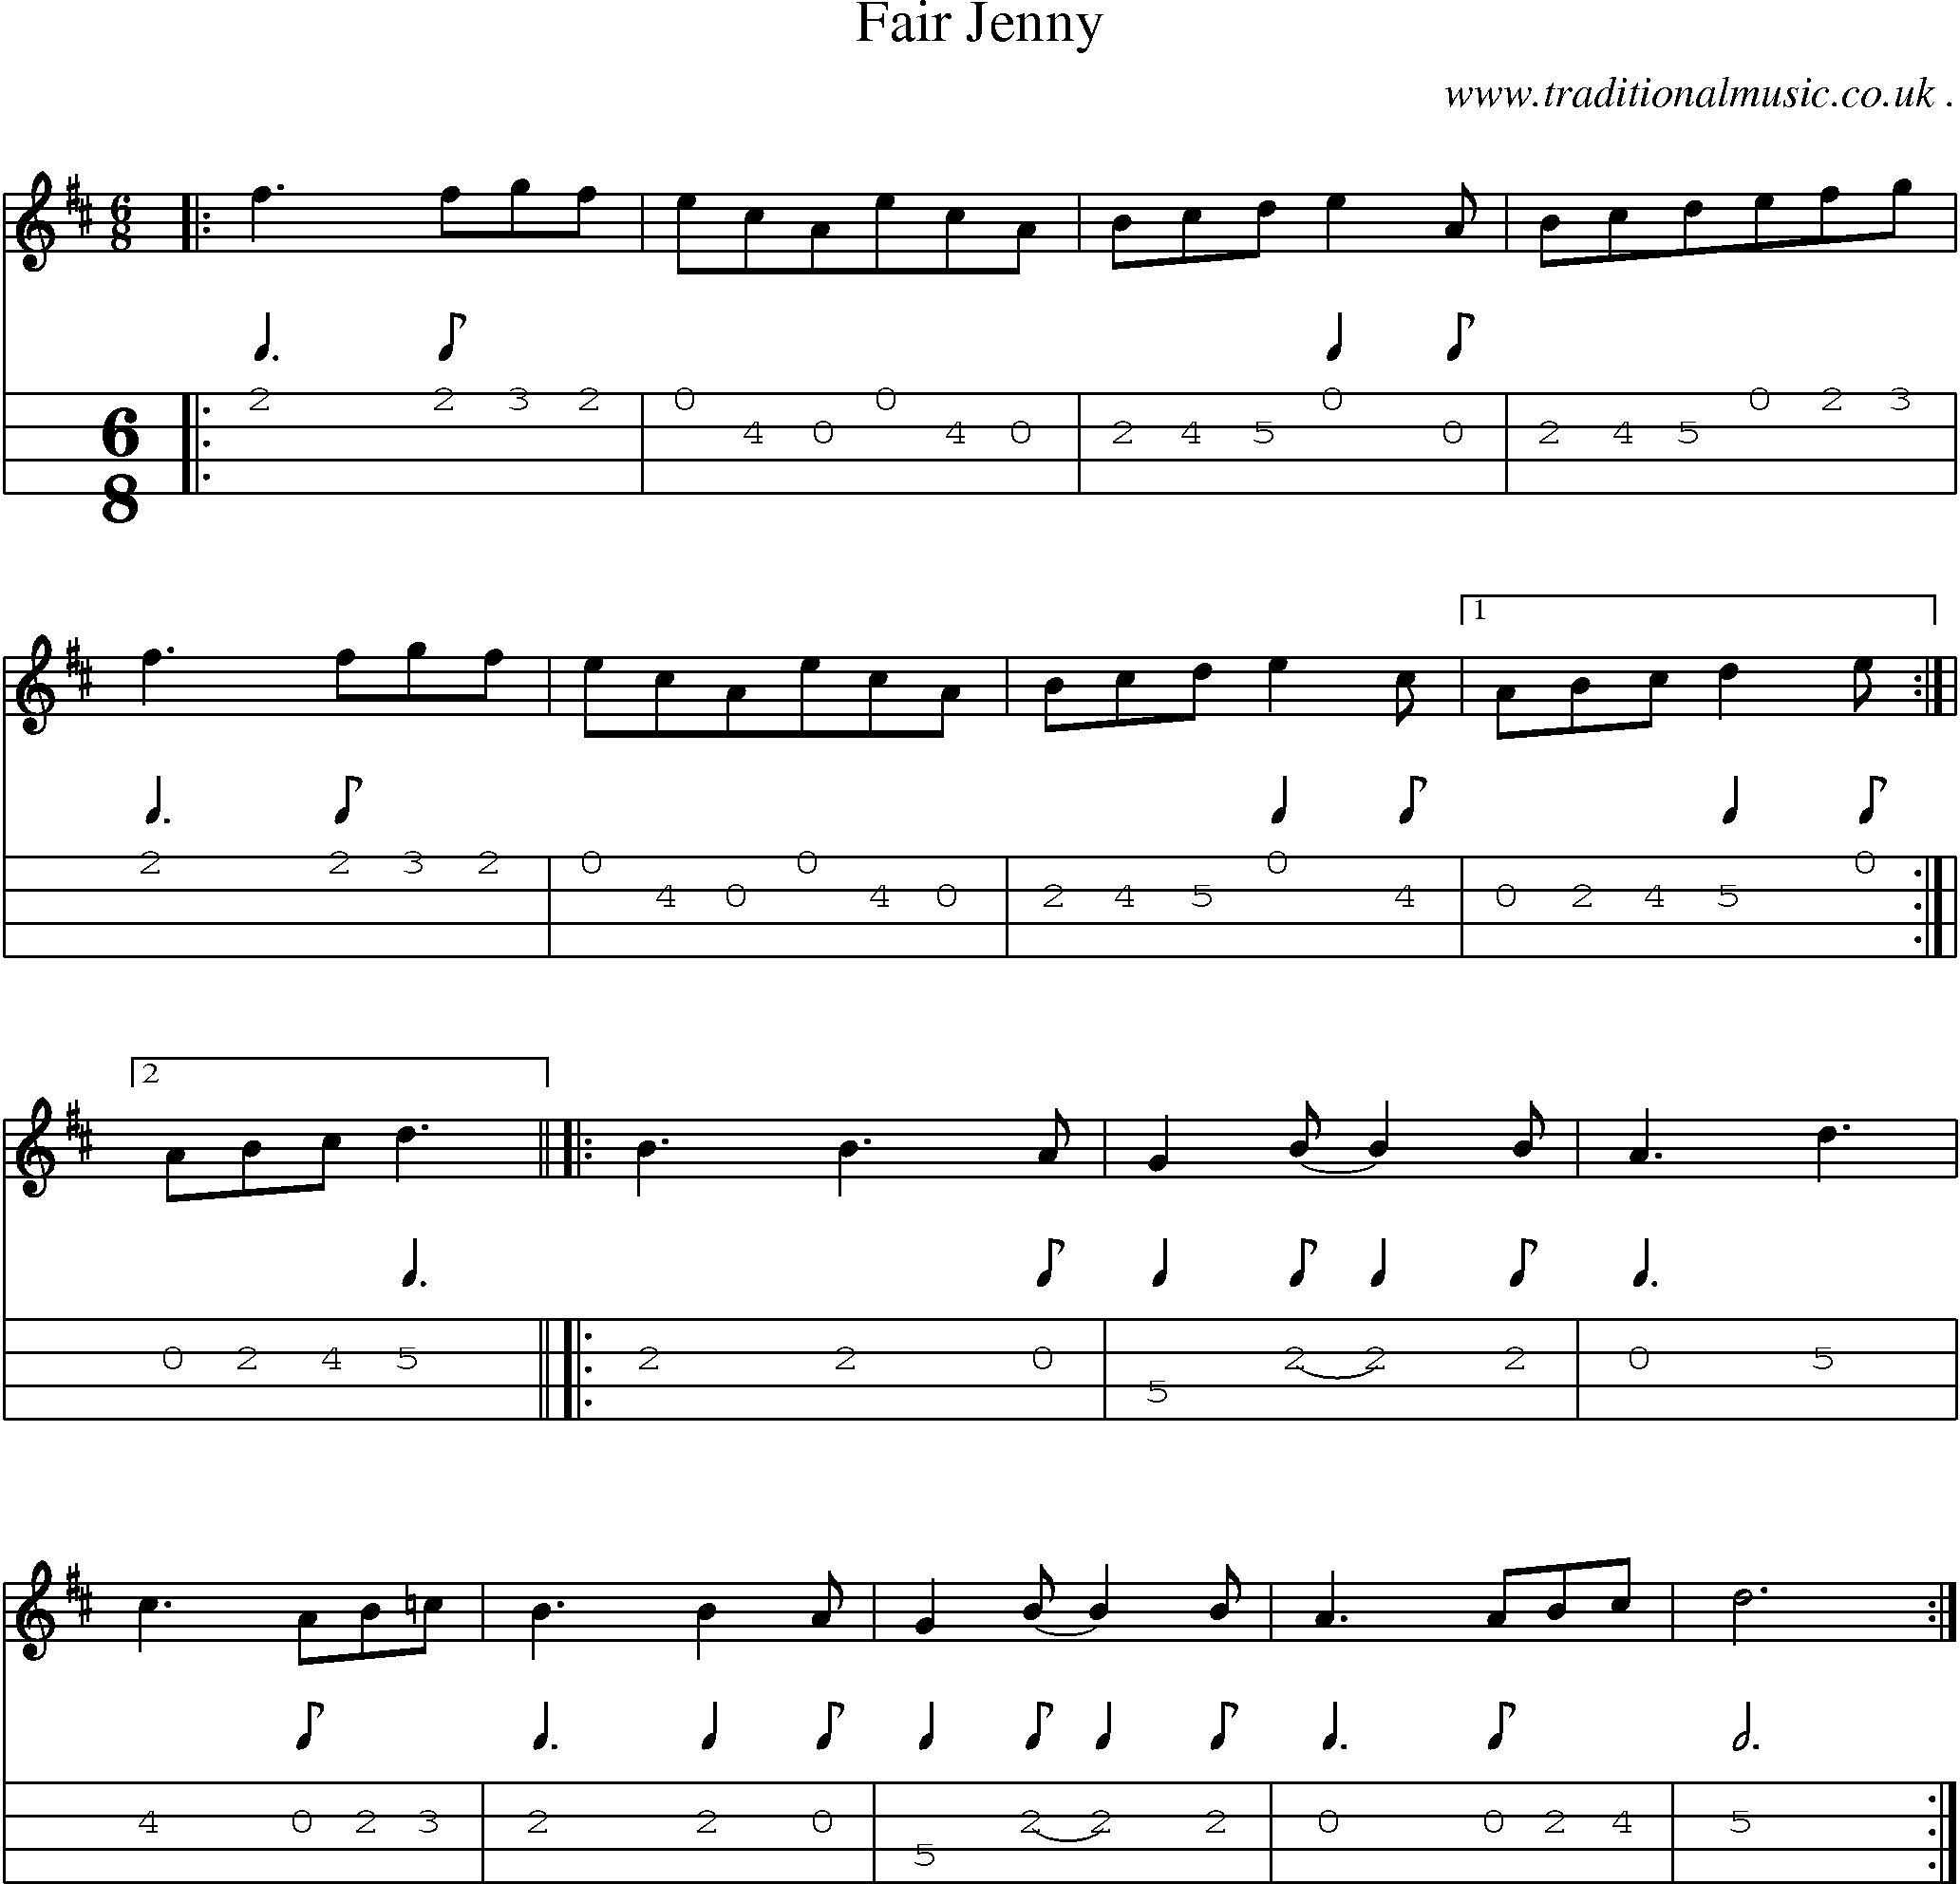 Music Score and Guitar Tabs for Fair Jenny